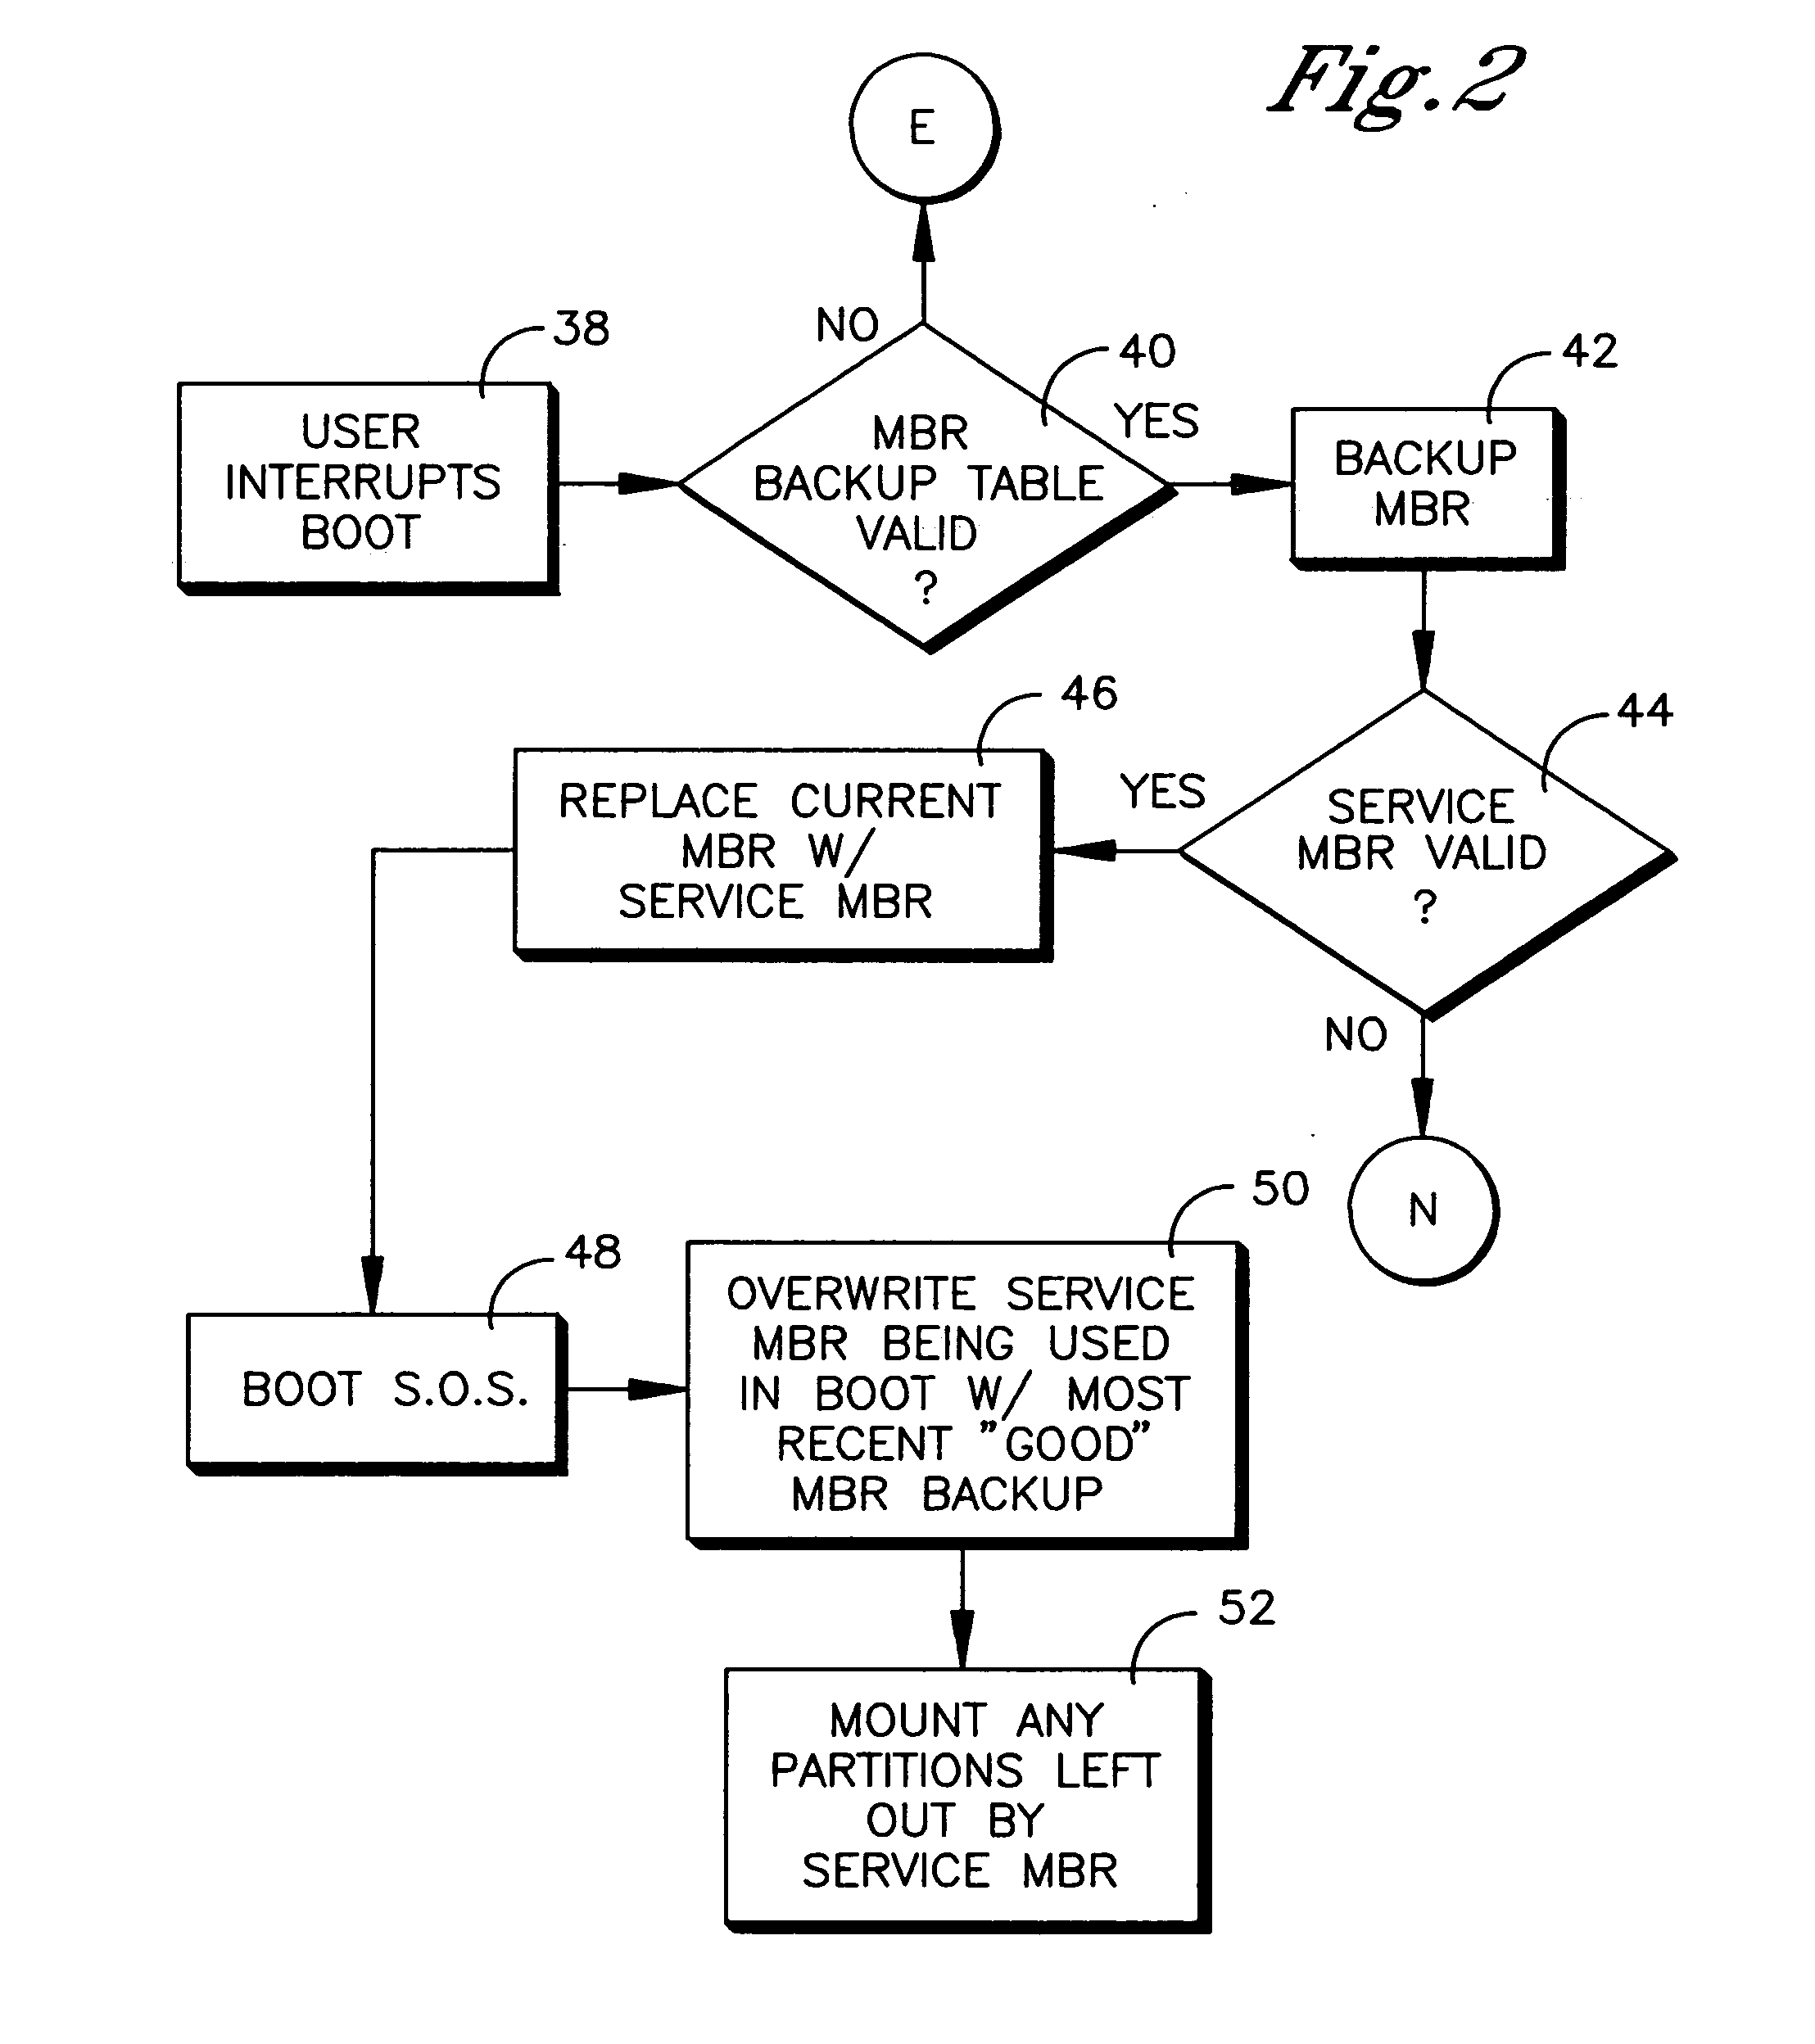 System and method for booting alternate MBR in event of virus attack